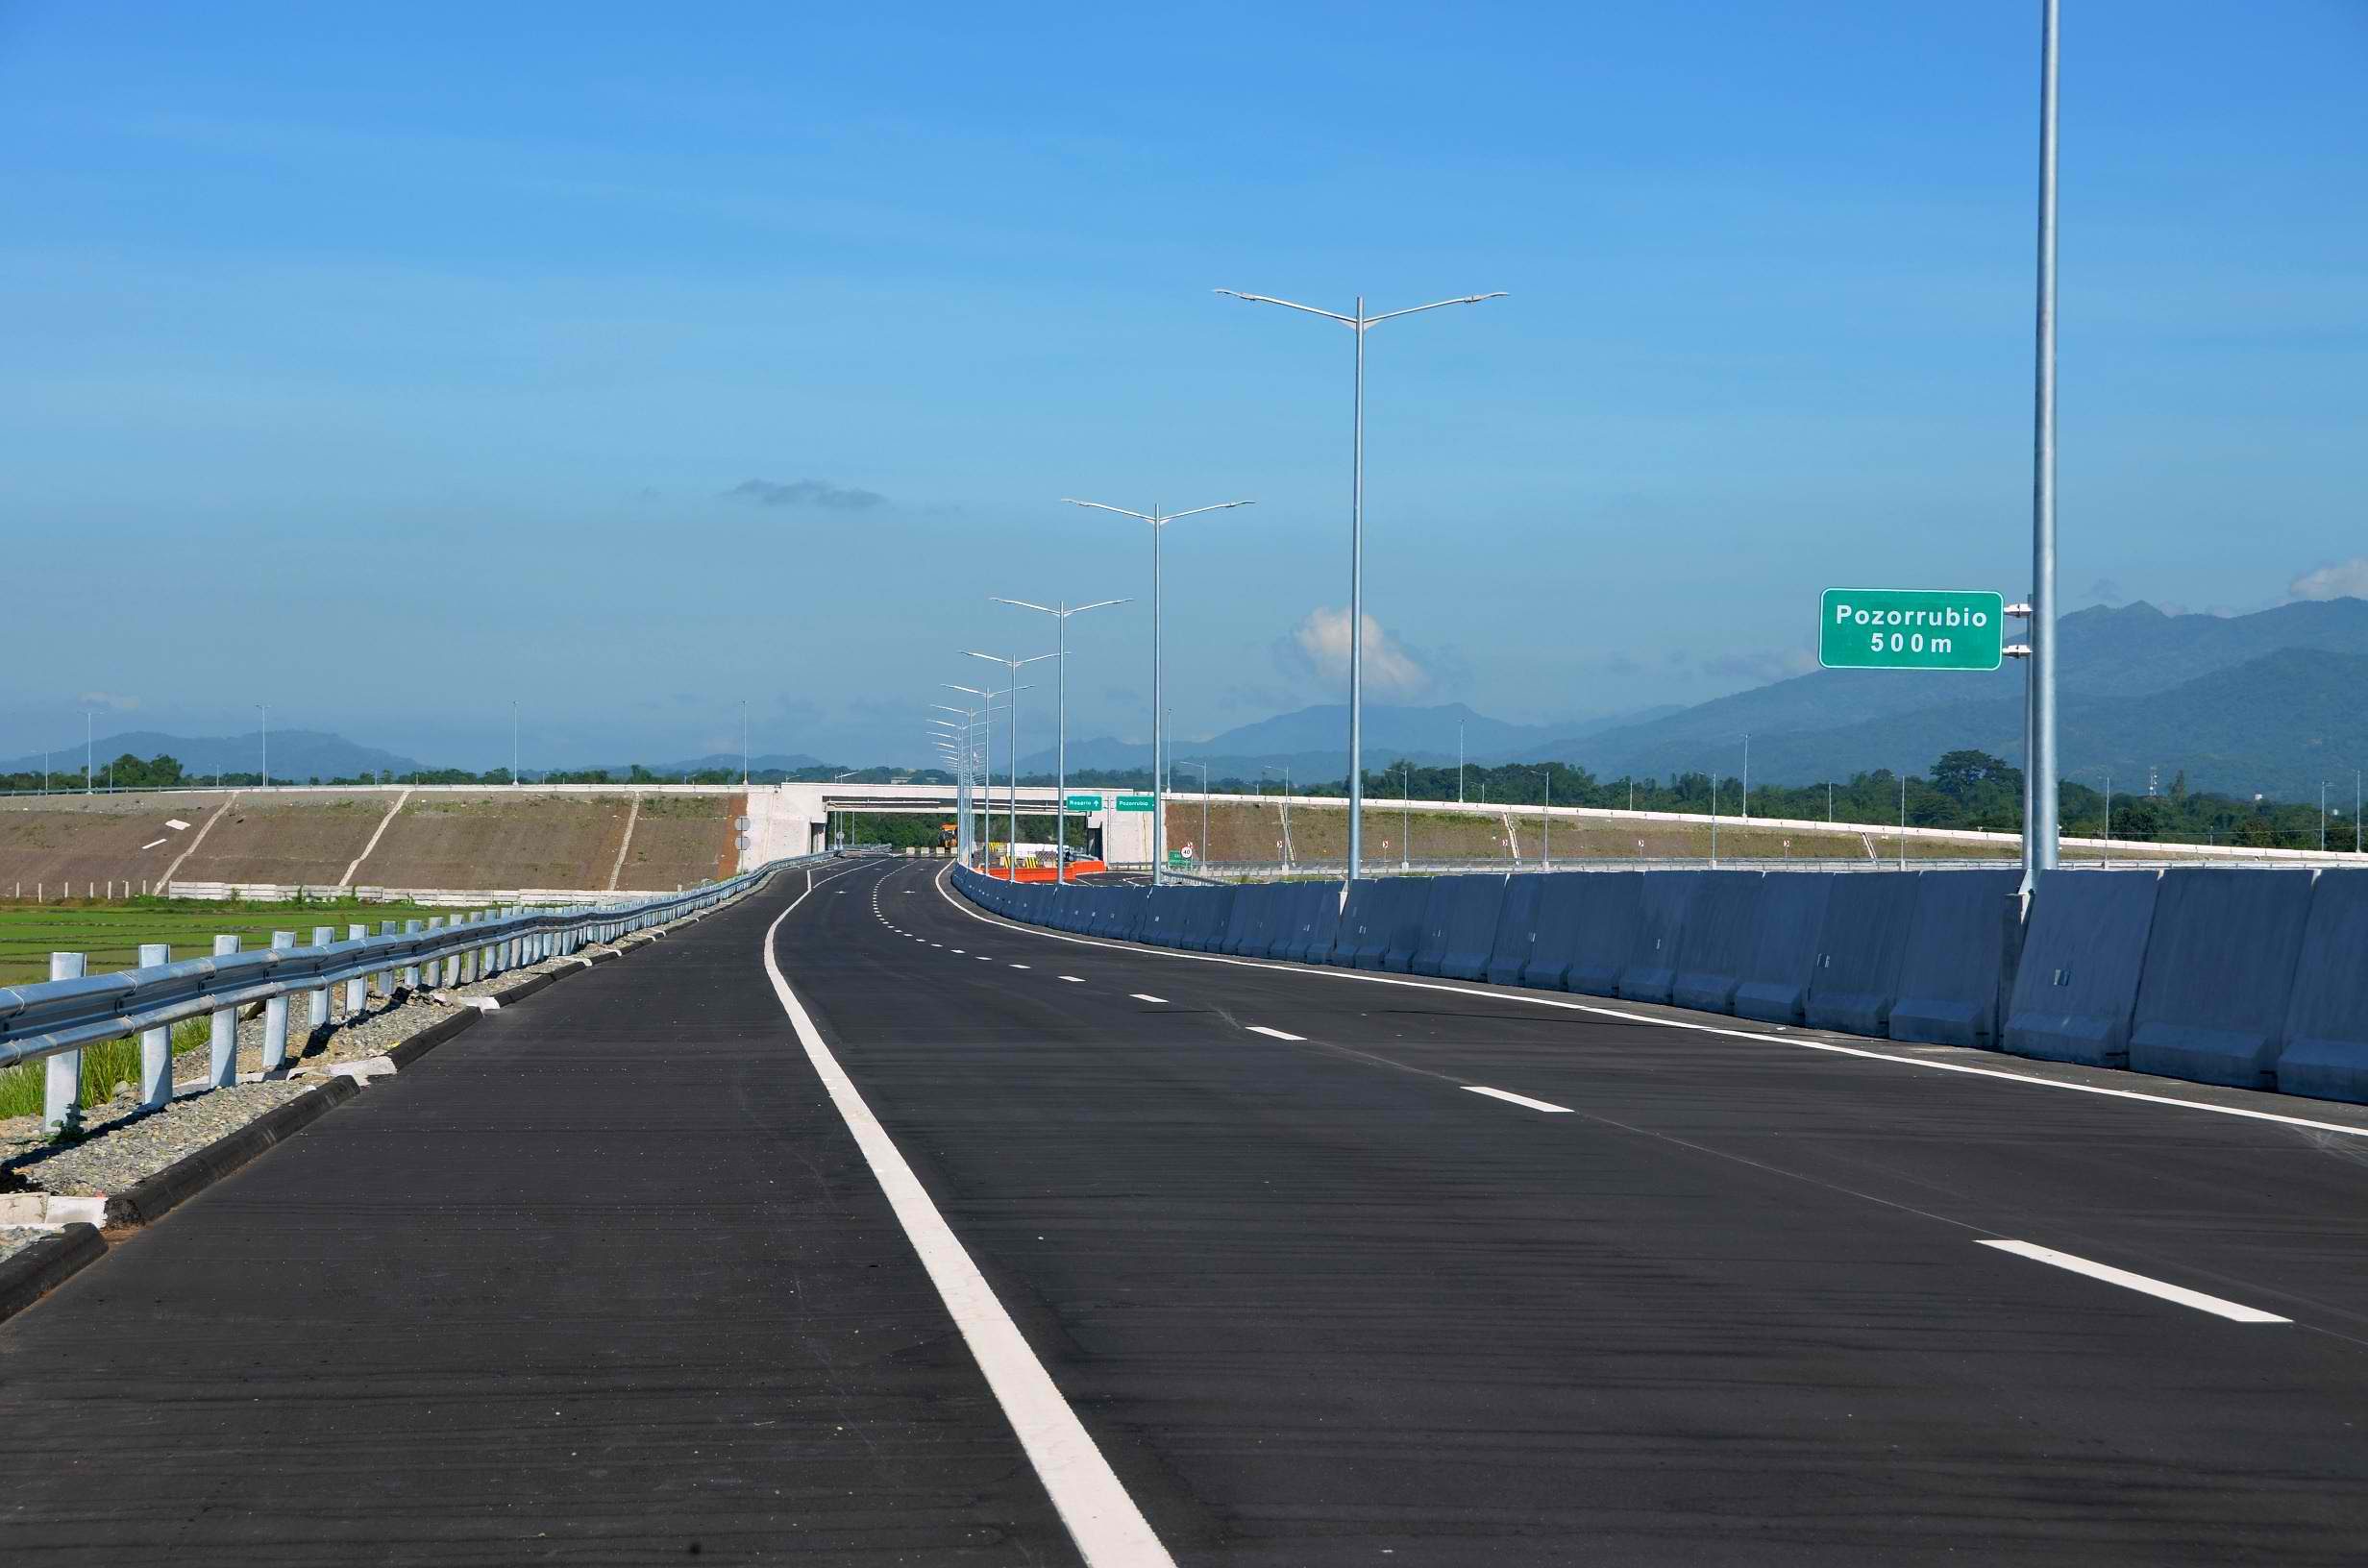 TPLEX now extended to Pozorrubio in Pangasinan